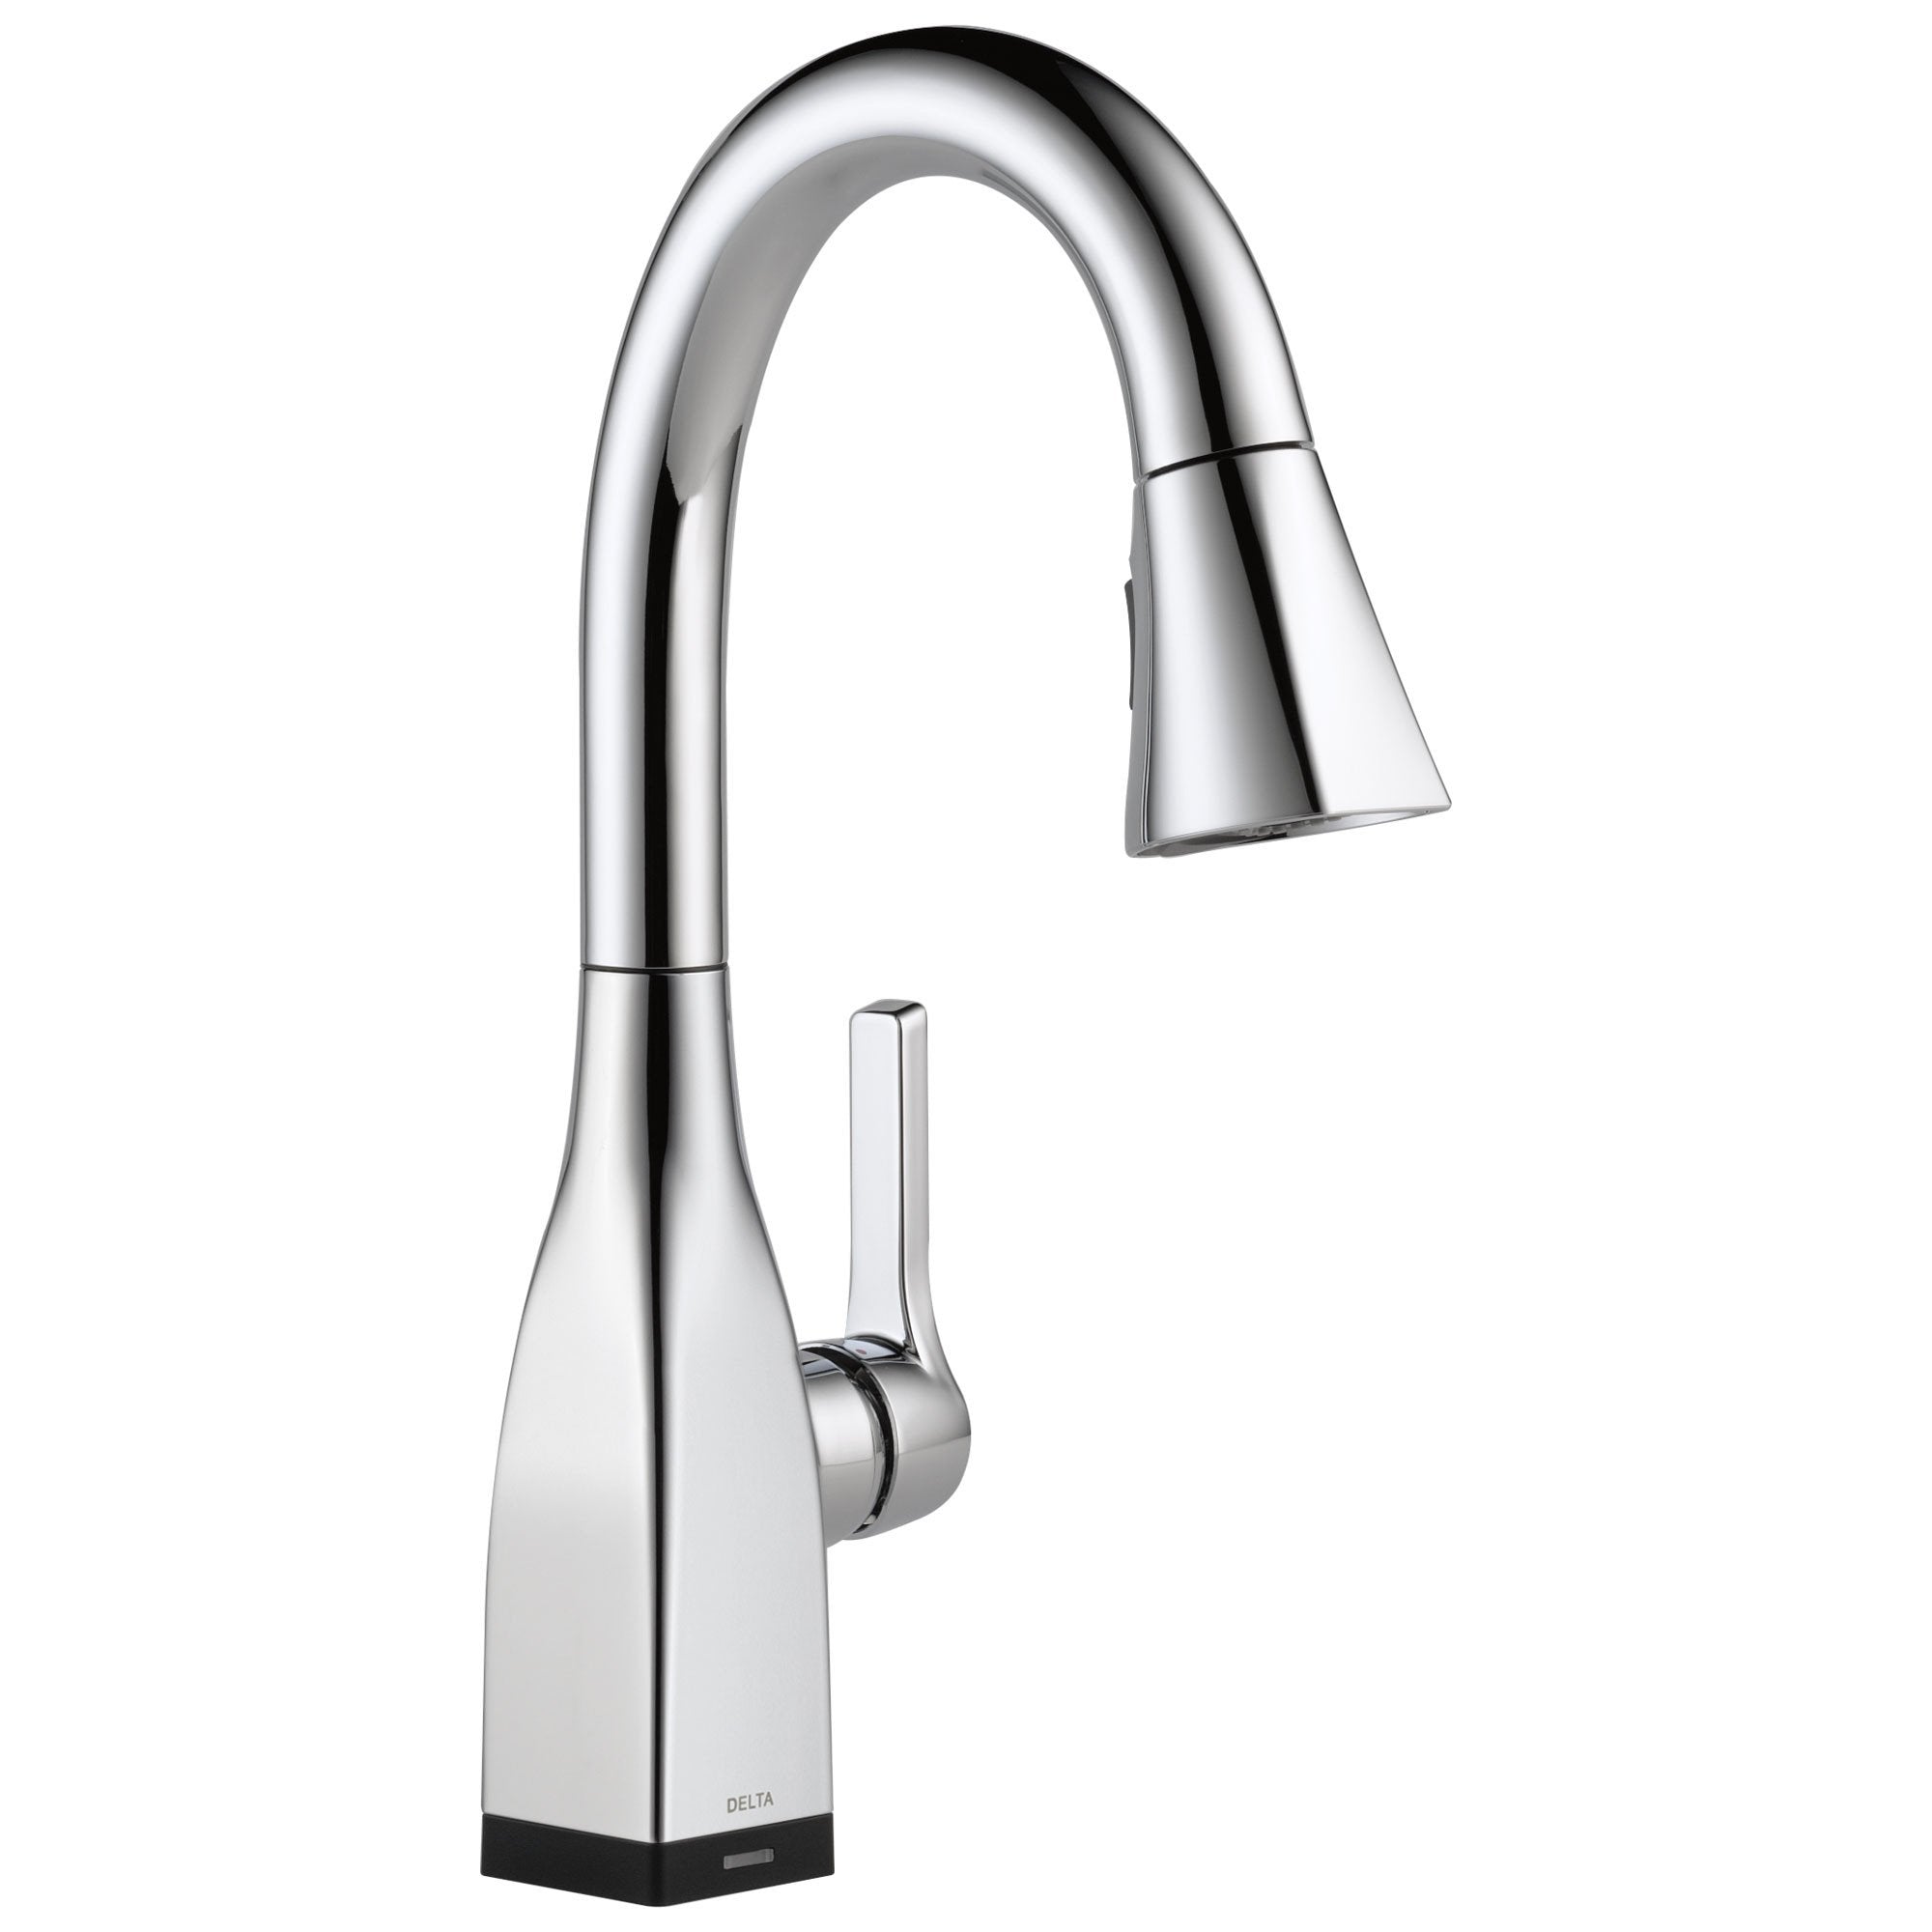 Delta Mateo Collection Chrome Finish Modern Single Handle Pull-Down Electronic Bar / Prep Sink Faucet with Touch2O Technology 732803